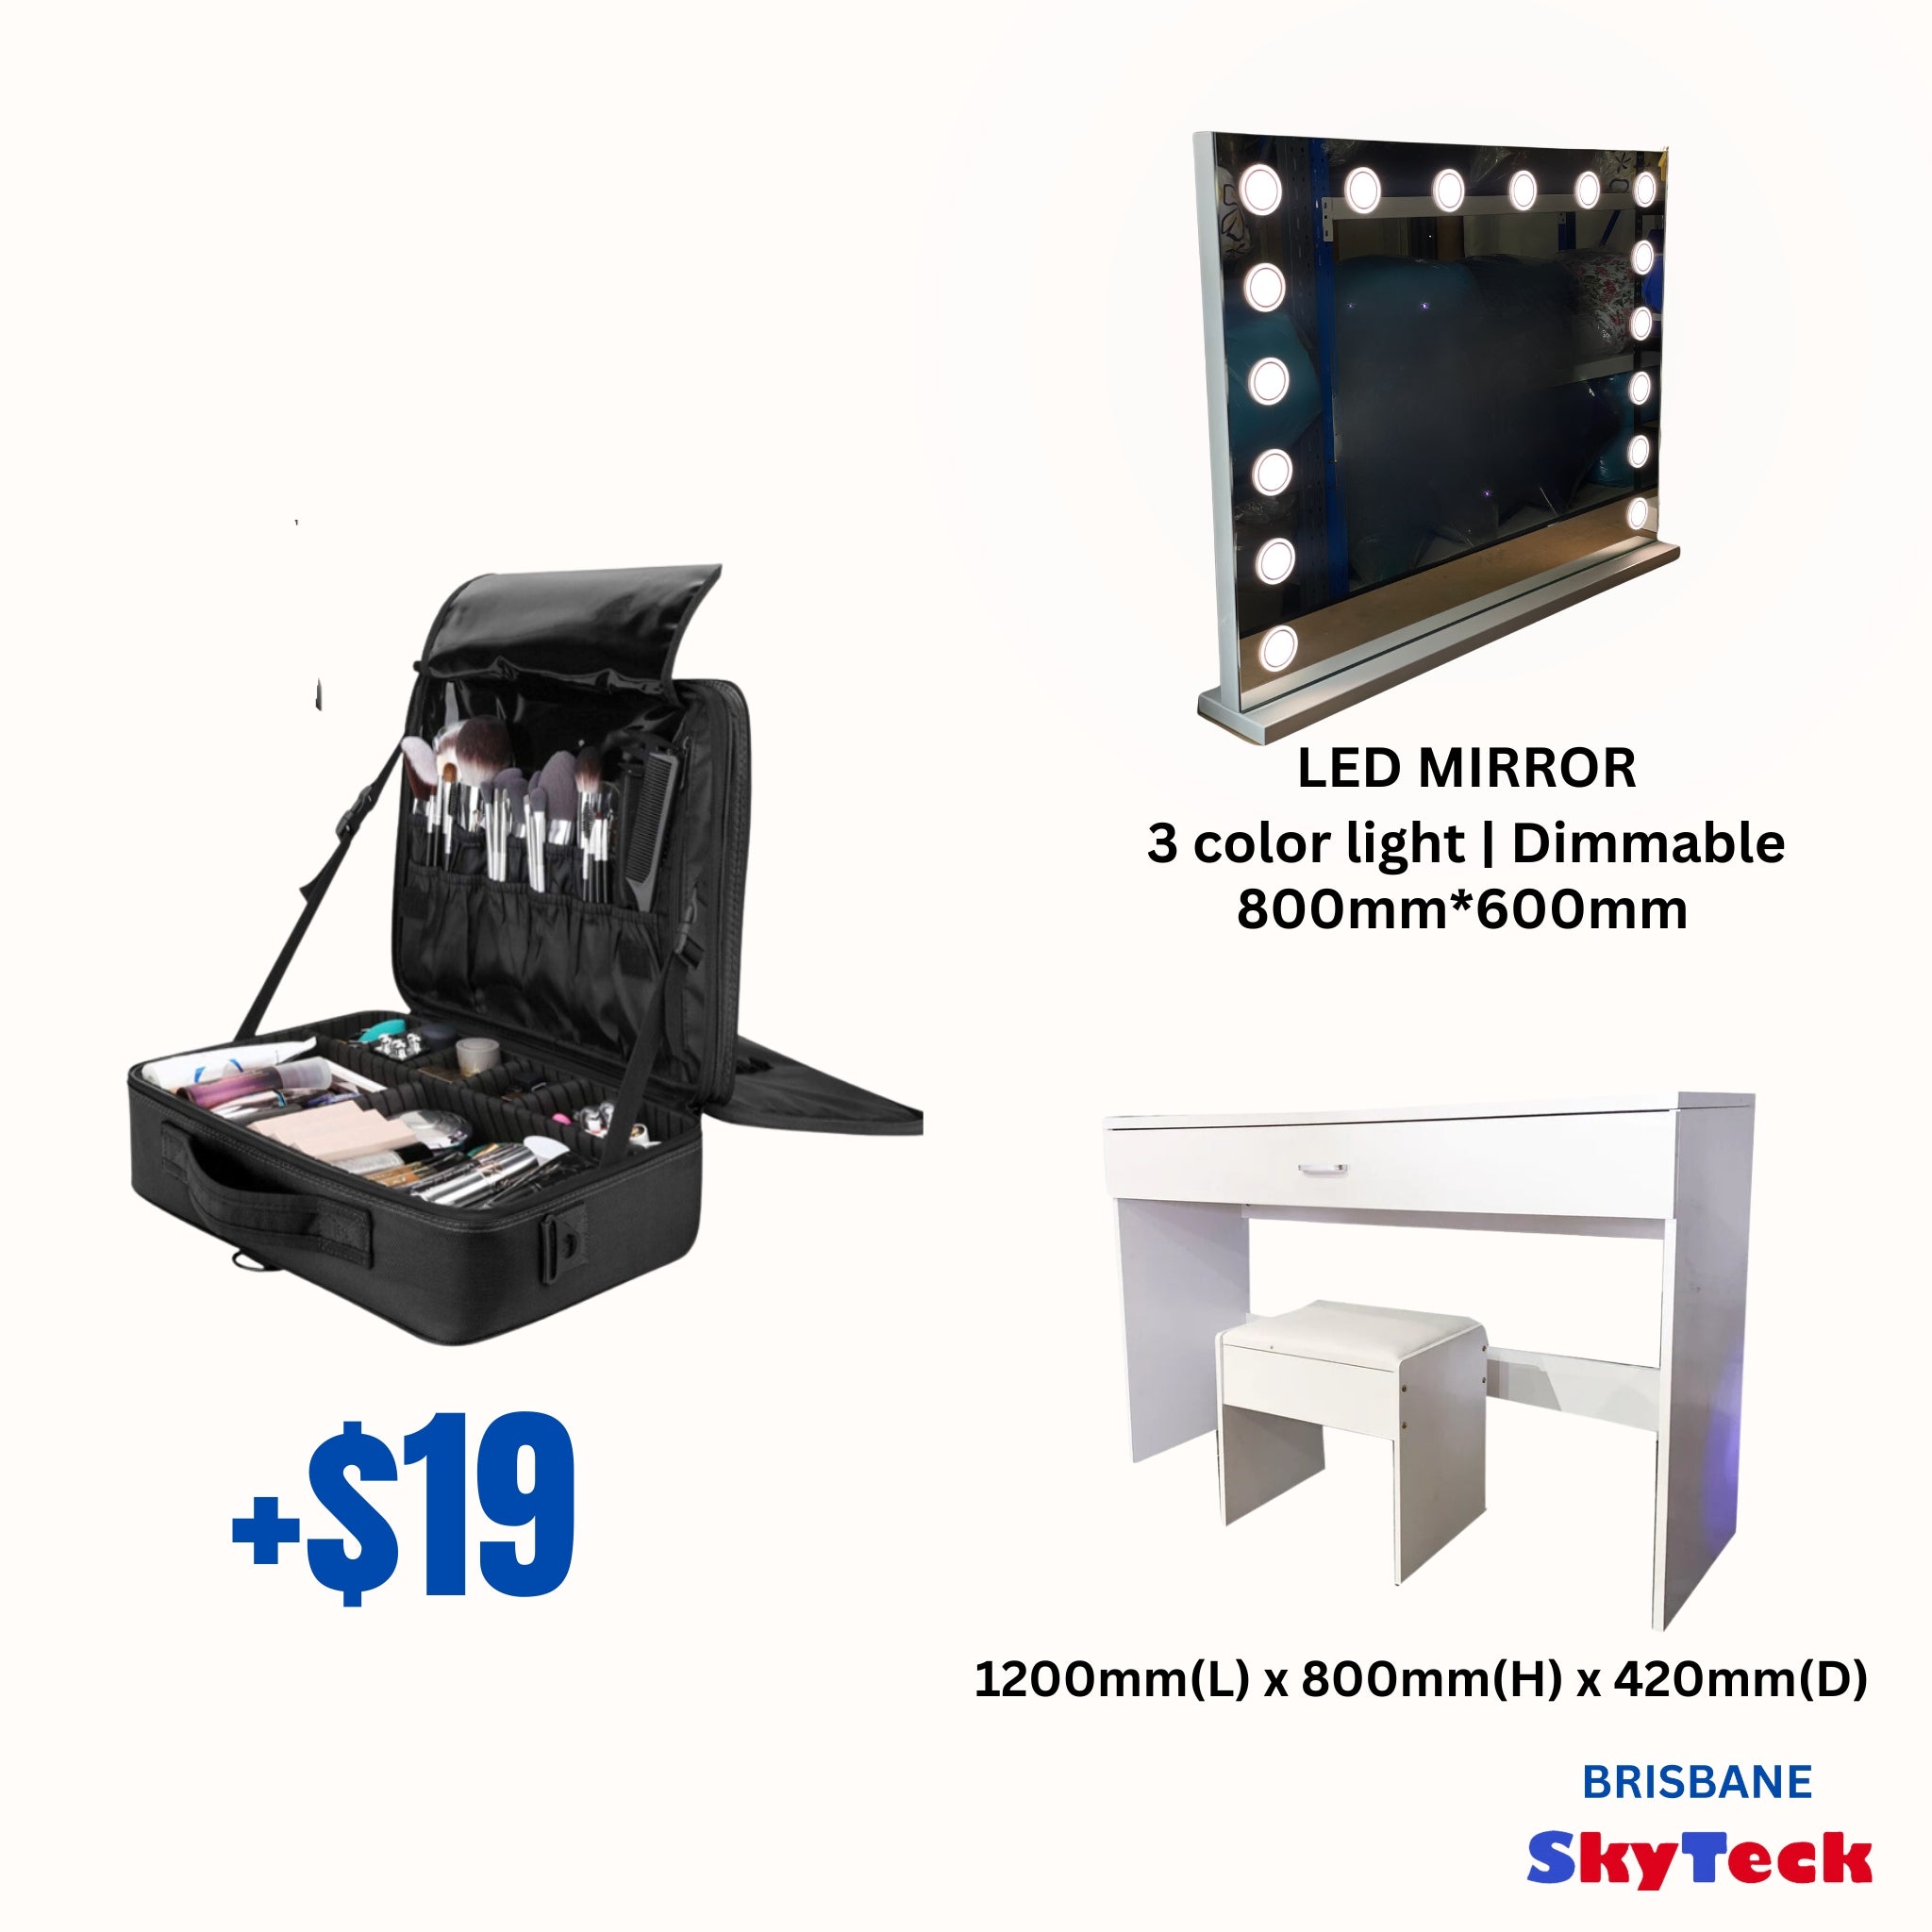 Vanity LED Mirror (800mm*600mm) + Dress-up table with Drawer (1200mm(L) x 800mm(H) x 400mm(D)) & pull out chair